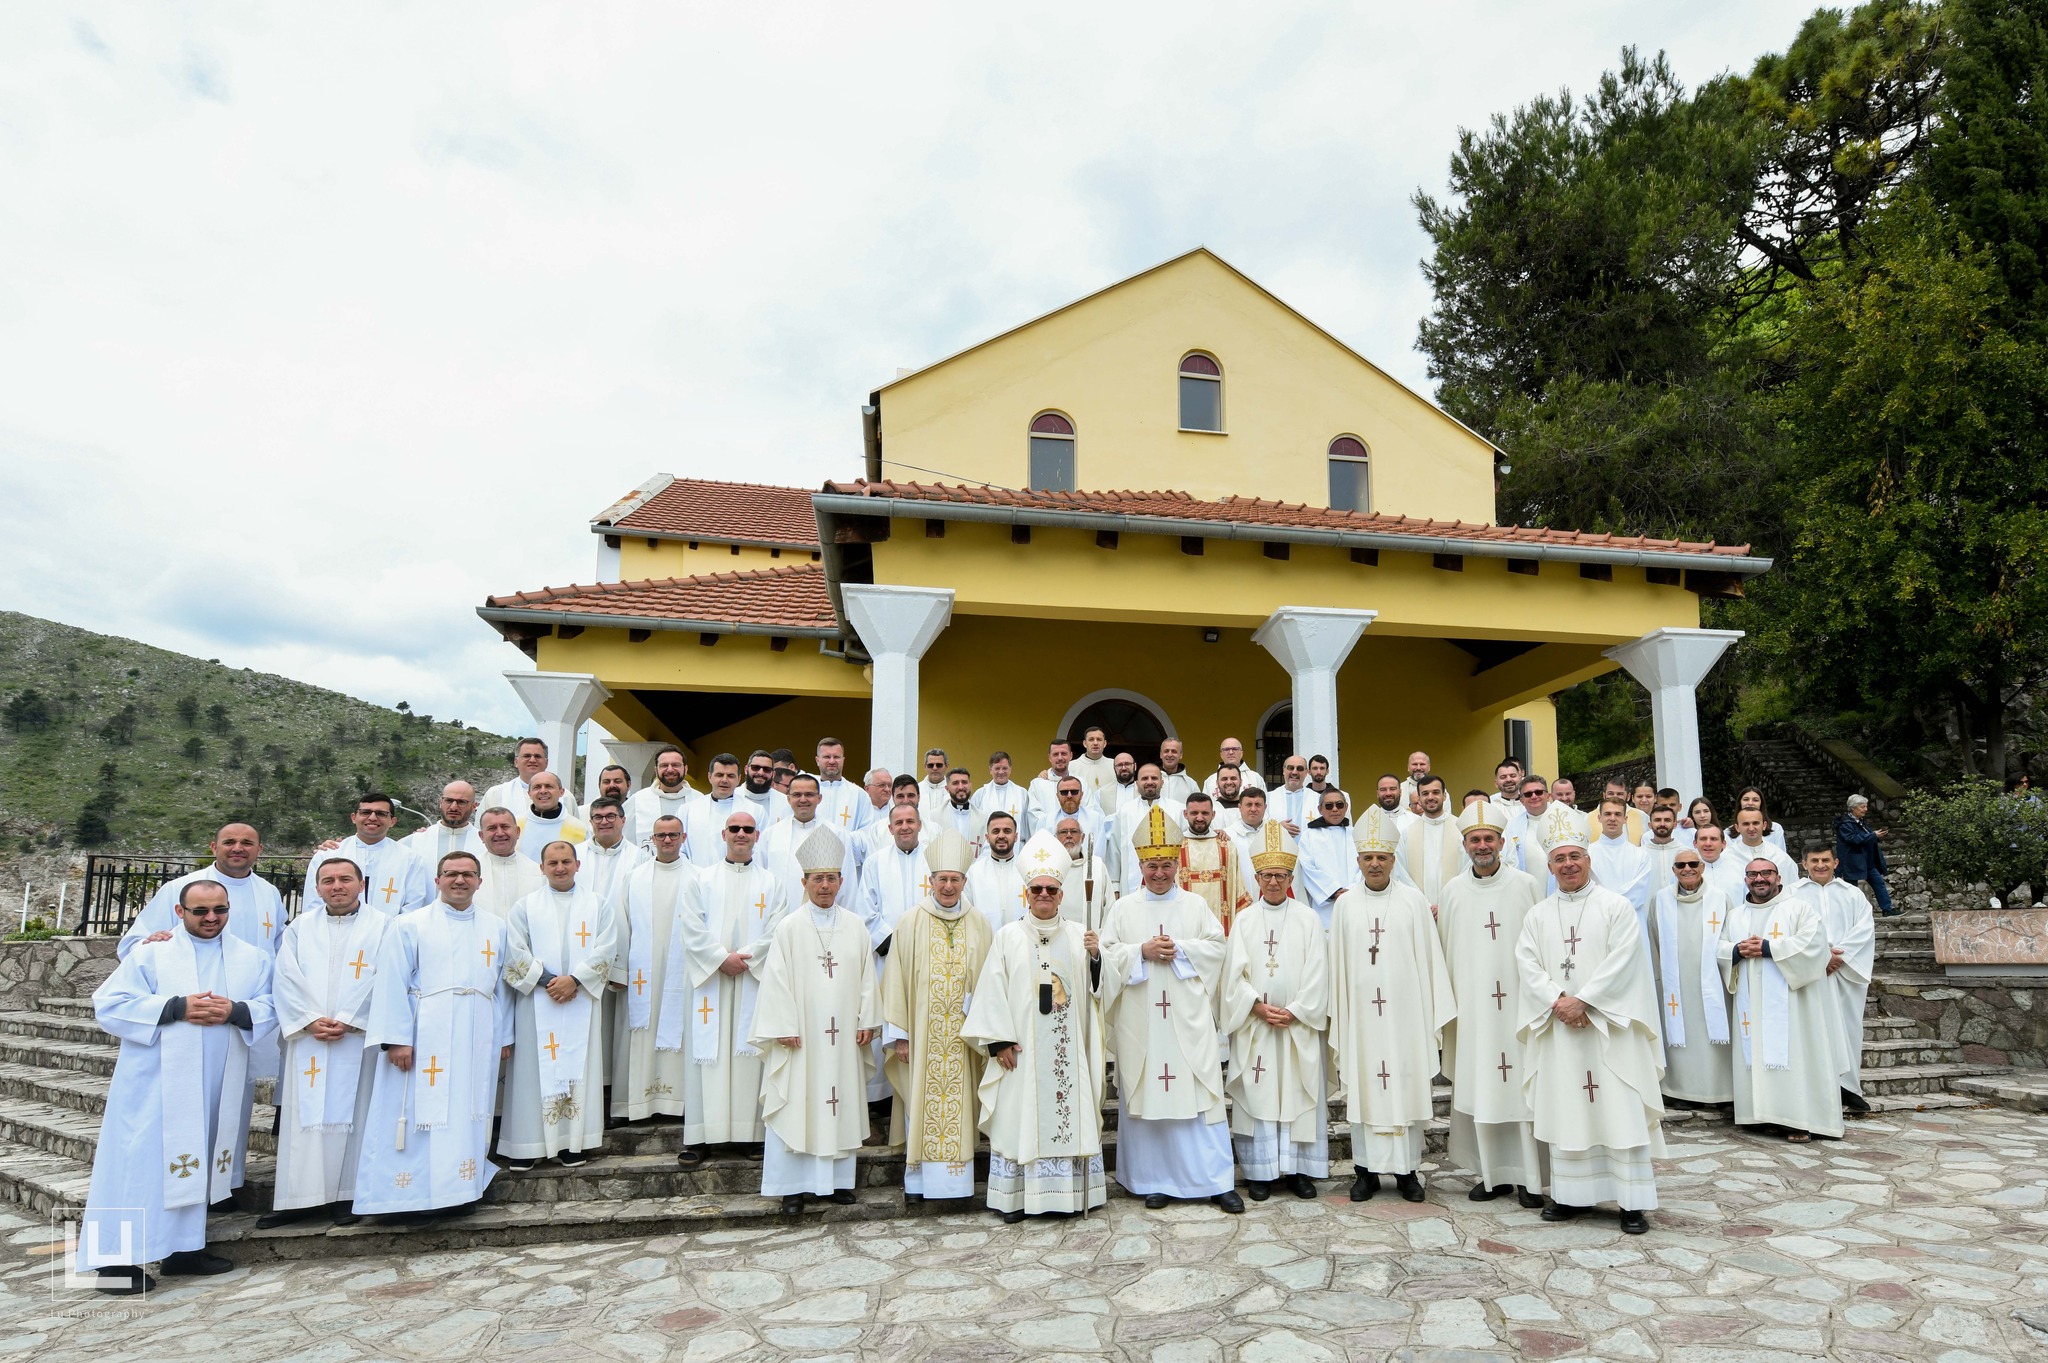 Shkodër Sanctuary Our Lady of Good Counsel Elevated to Minor Basilica Status on Feast Day